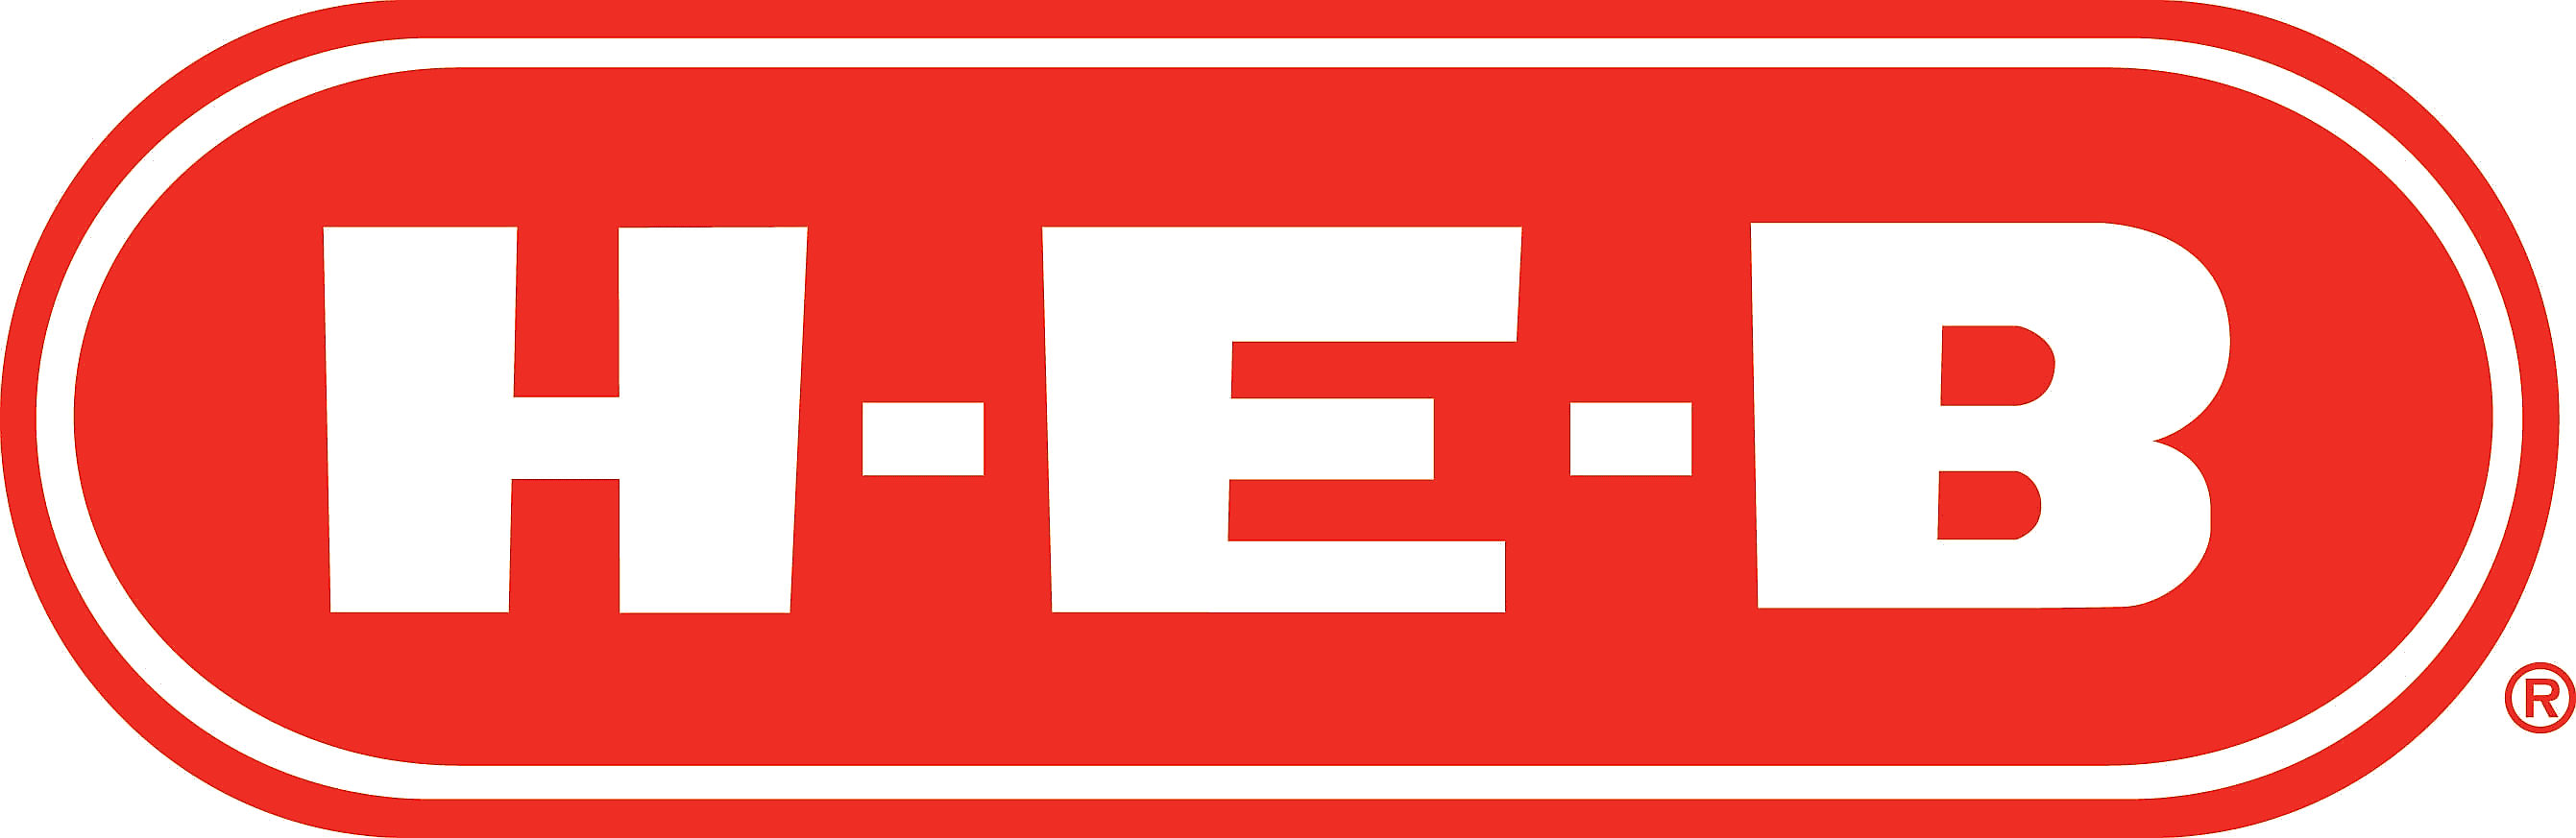 Maybelline Company Logo - File:Logo of the HEB Grocery Company, LP.png - Wikimedia Commons